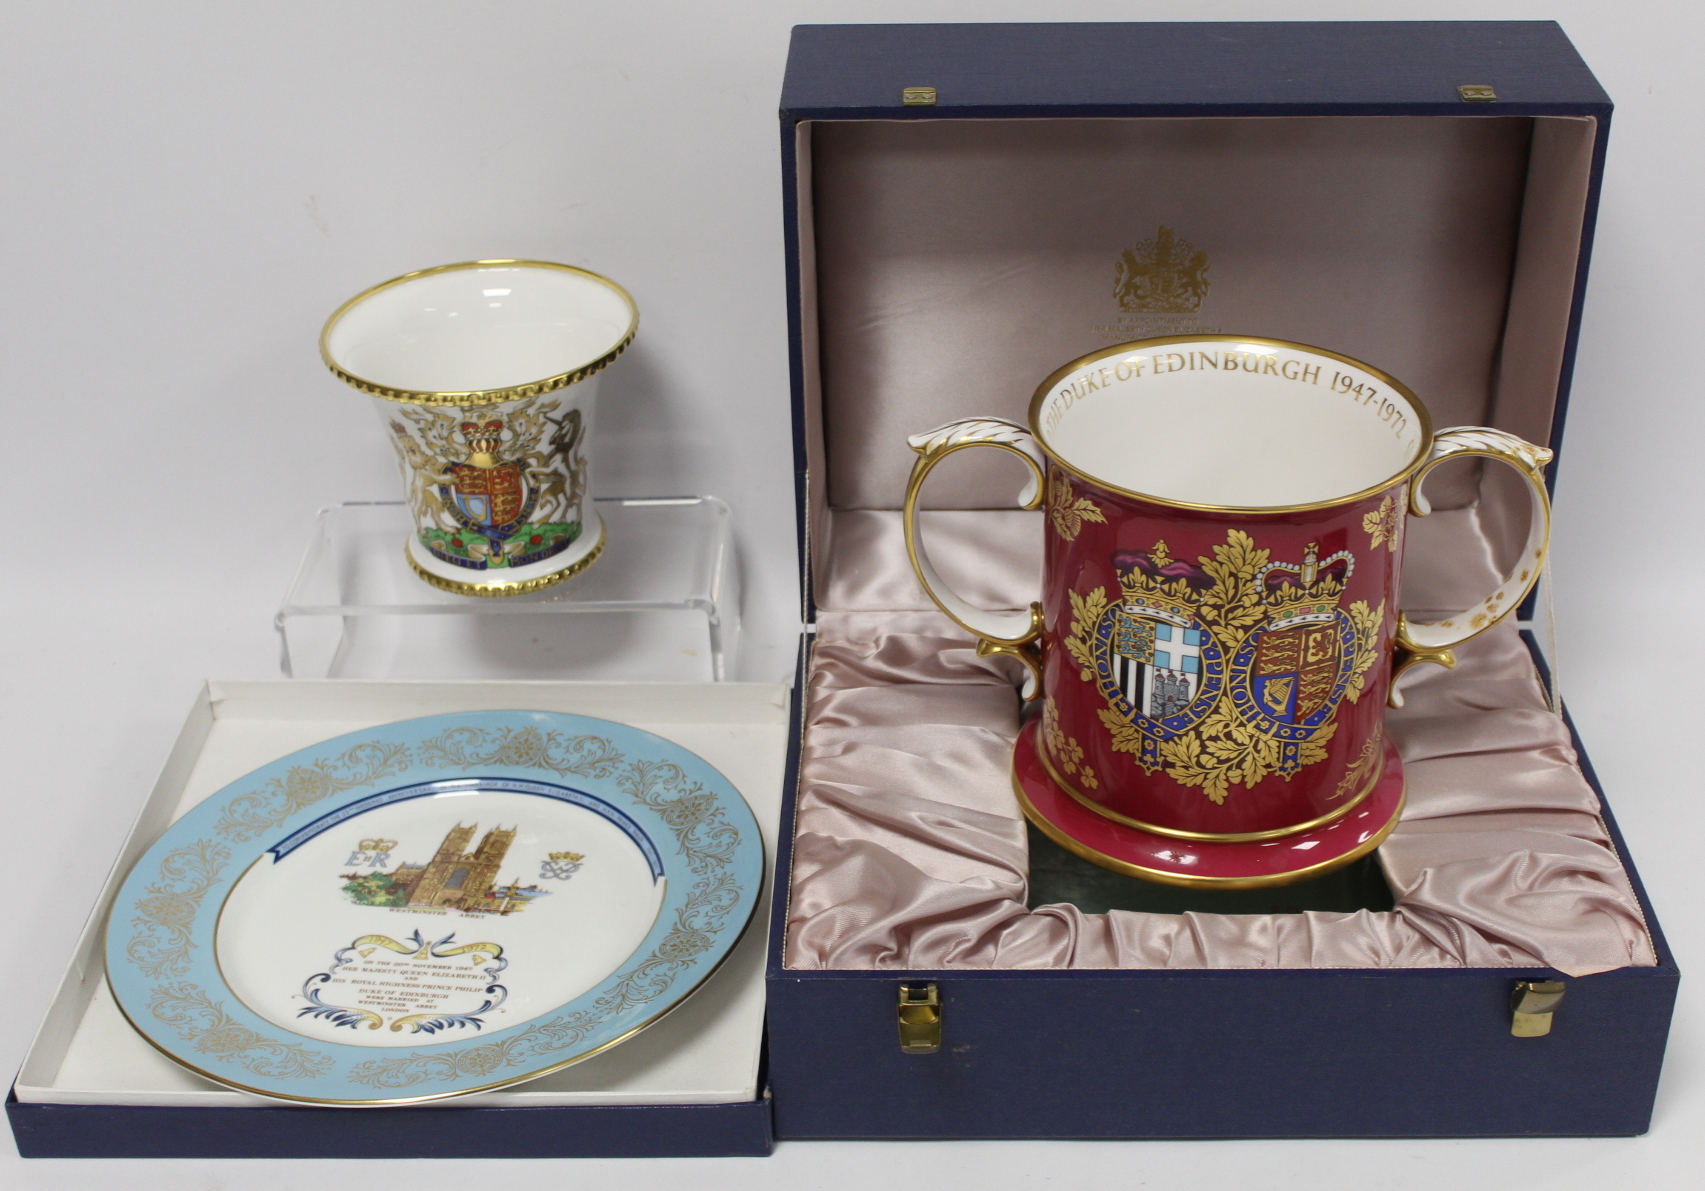 Large Spode commemorative bone china loving cup for the Silver Wedding of The Queen and Duke of